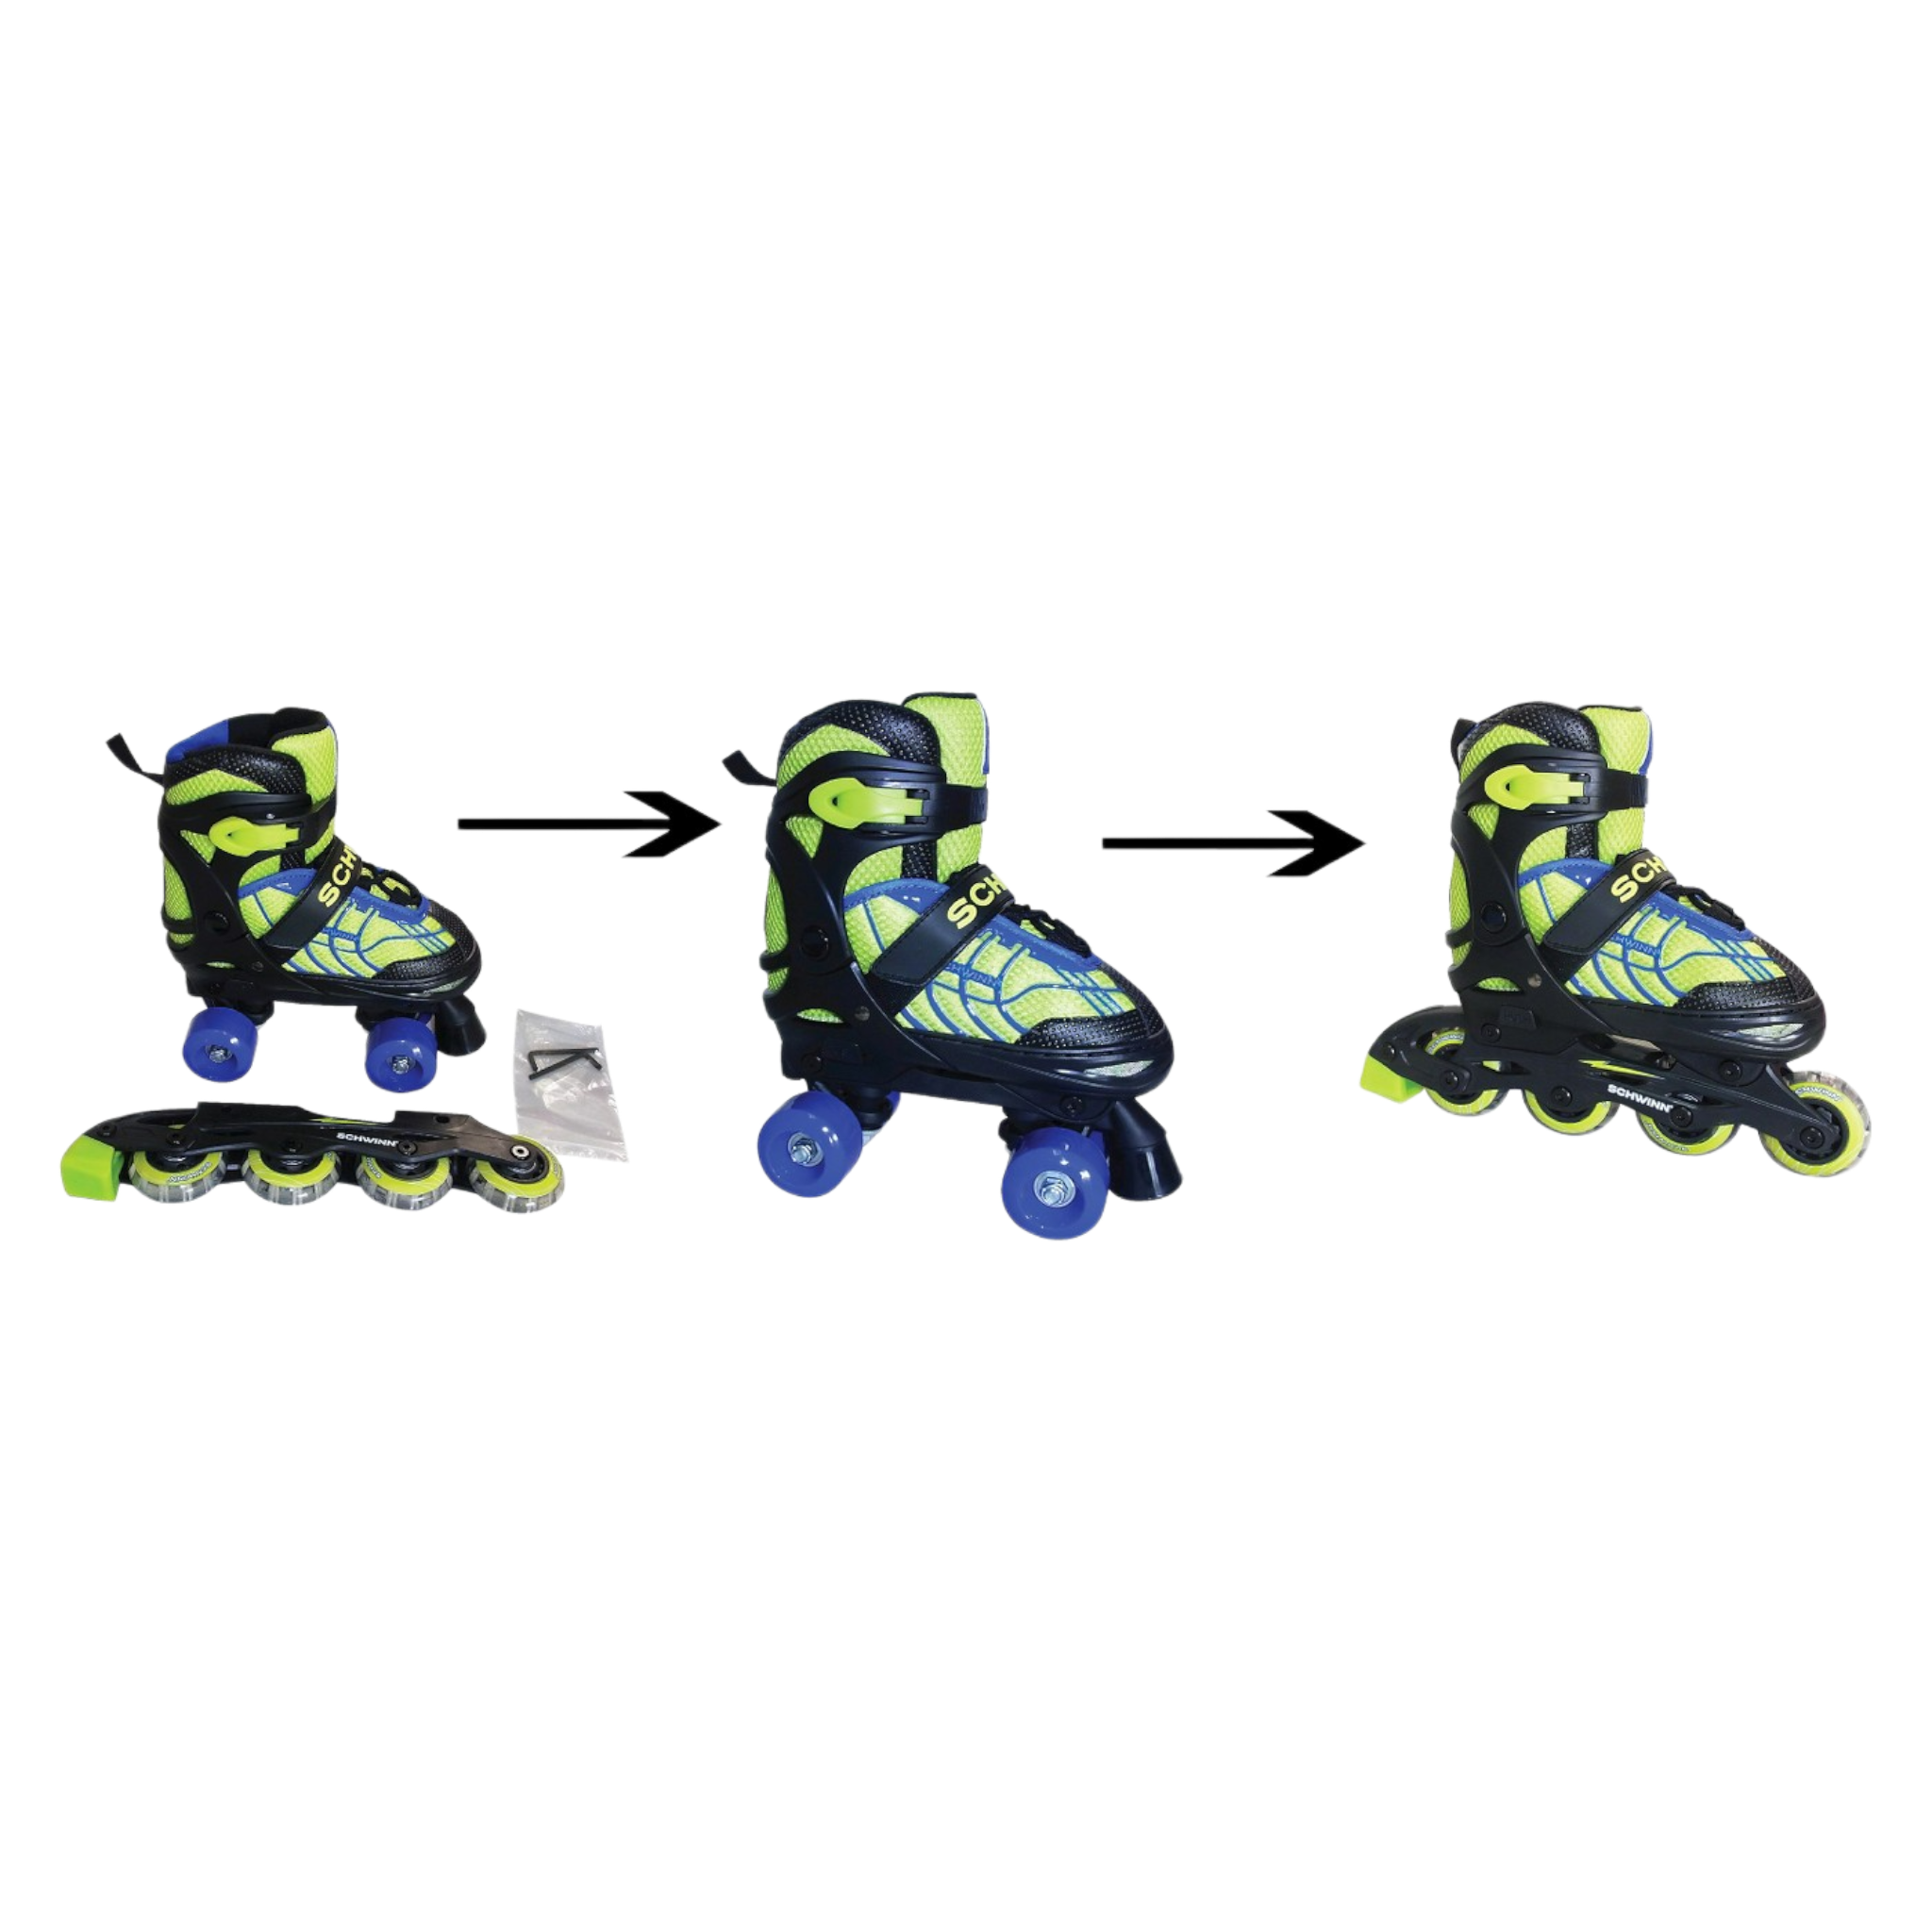 Schwinn Switcher Boys 2 in 1 Quad Skates and InLine Skates combo. Easily converts from Quad Skates to InLine Skates. Adjustable to fit sizes Kids sizes 1-4. Perfect childrens beginner roller skates. - Pro-Distributing